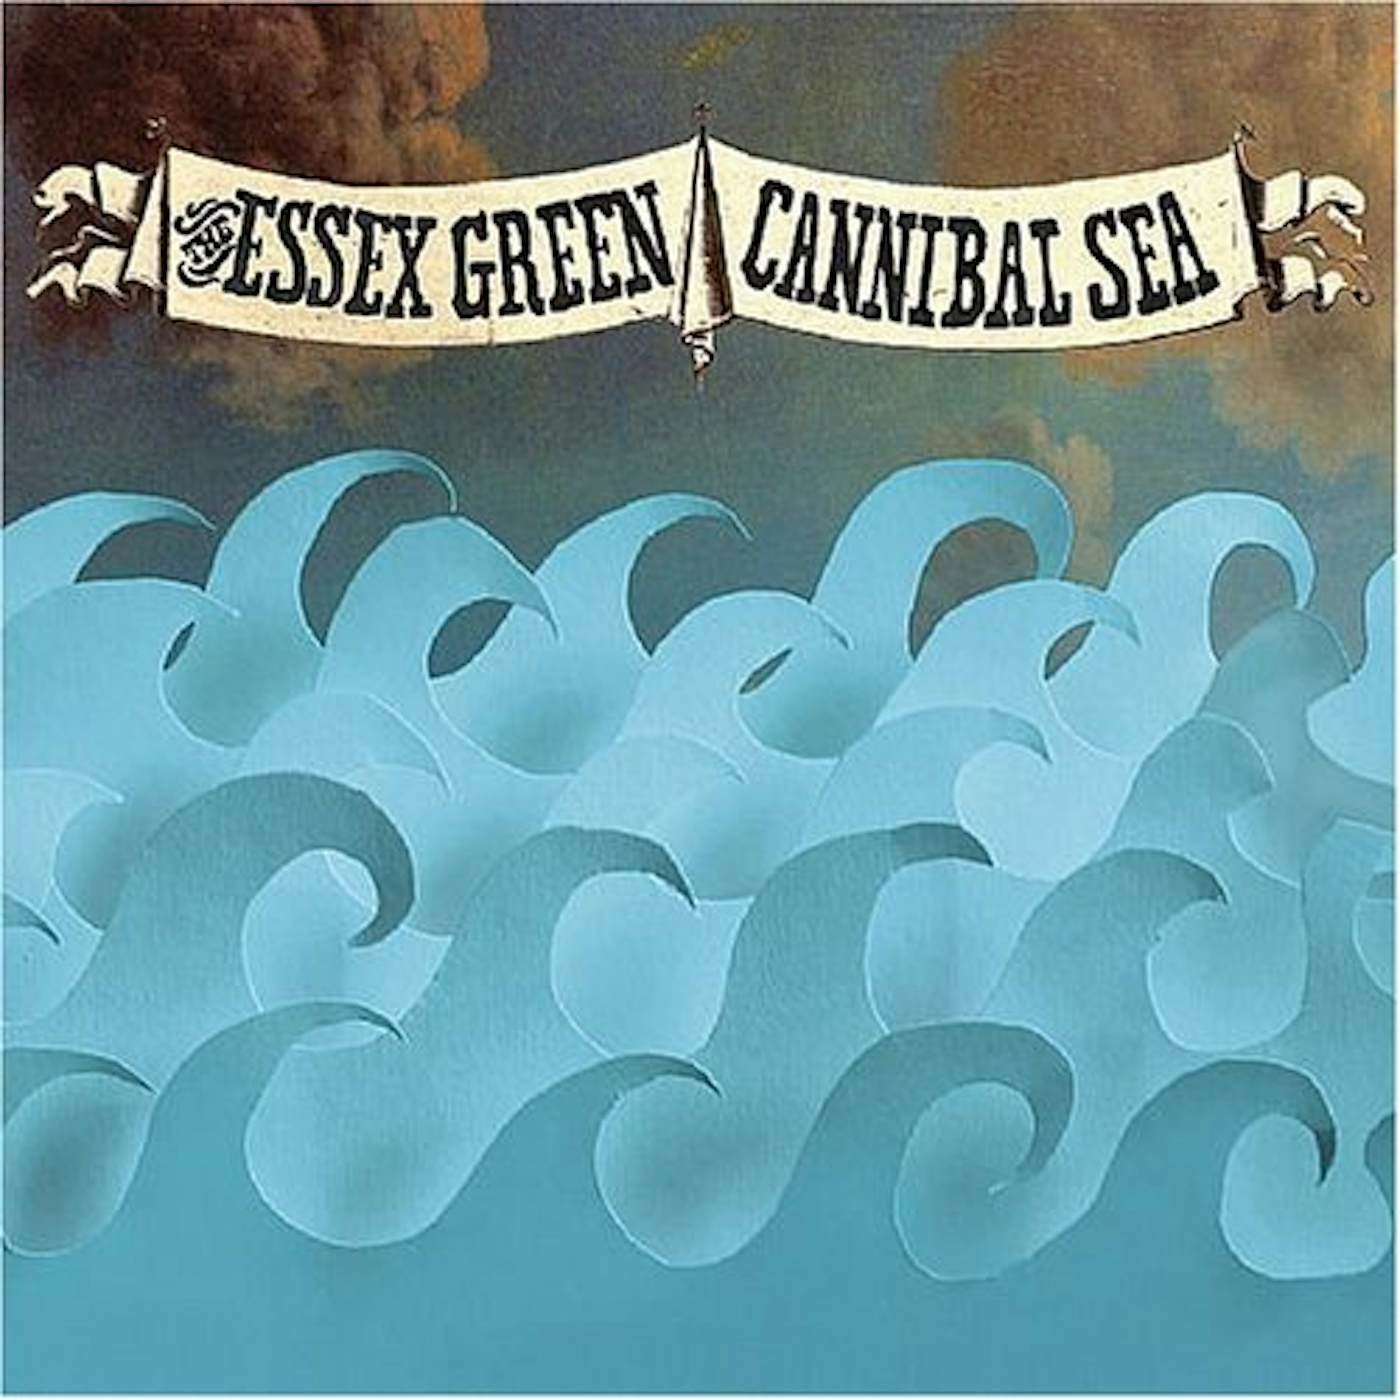 The Essex Green CANNIBAL SEA CD